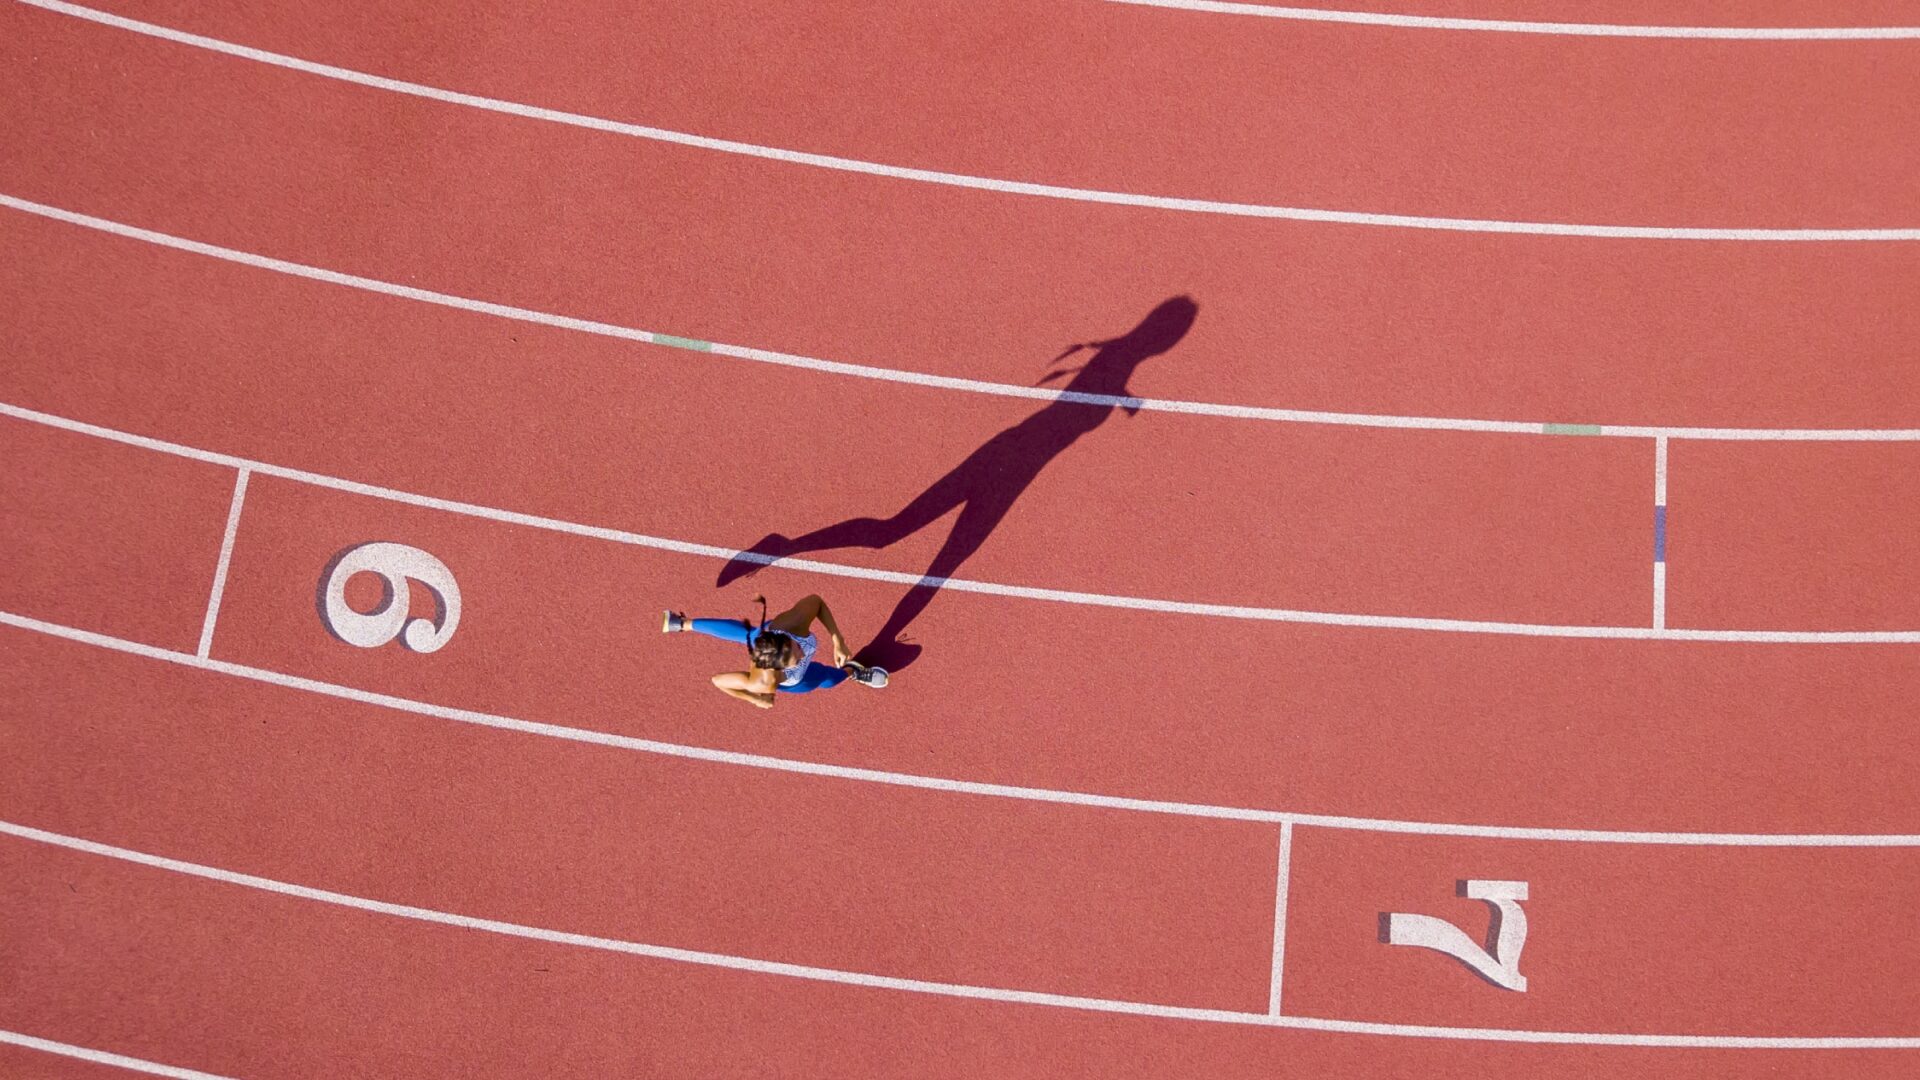 Above shot of a woman rounding a corner on a running track